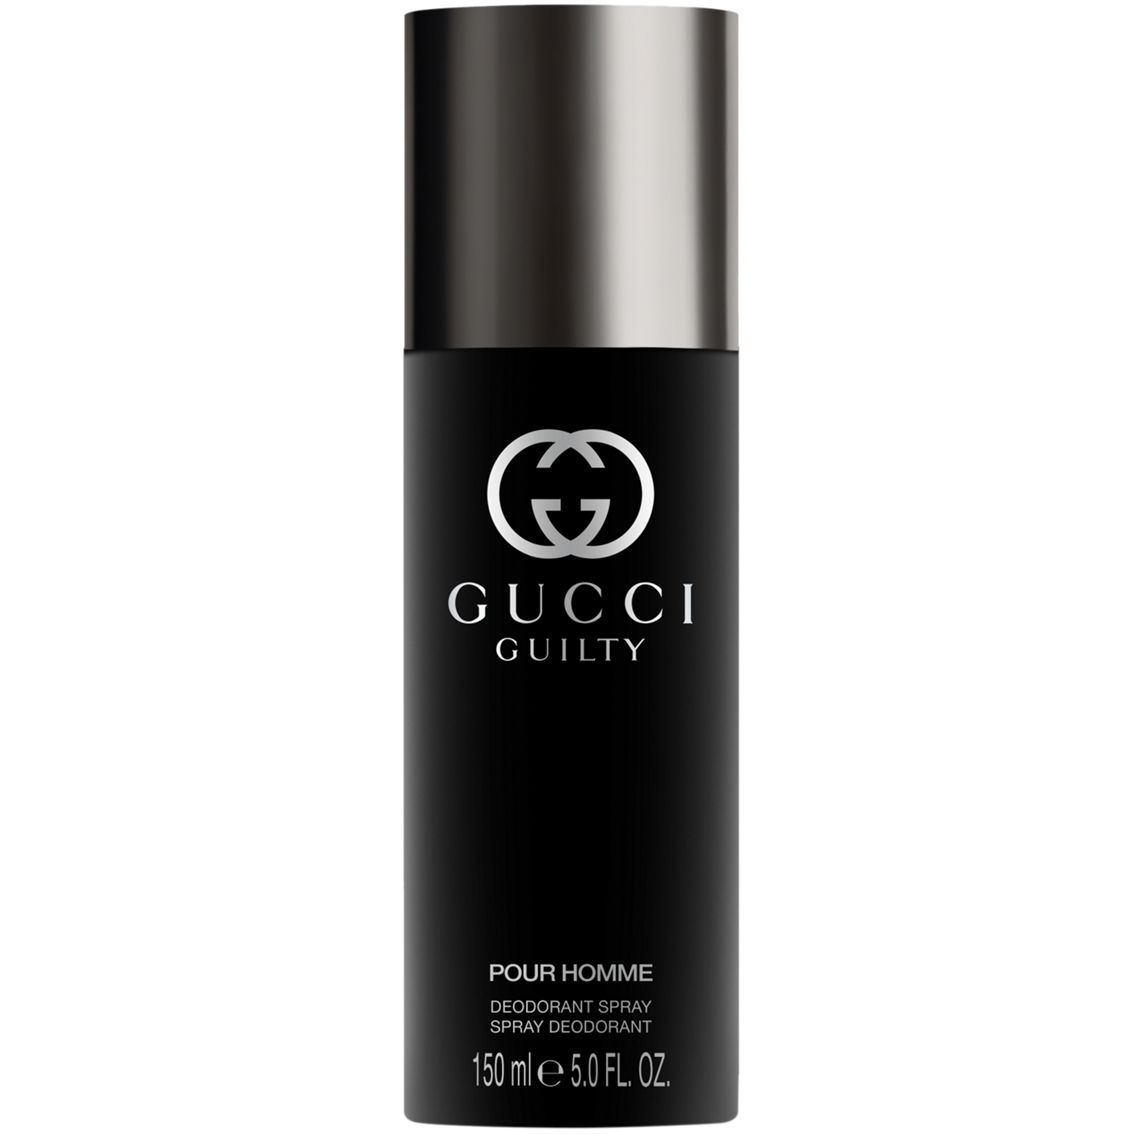 Gucci Guilty Pour Homme Deodorant Spray, 5 oz. - Image 2 of 3